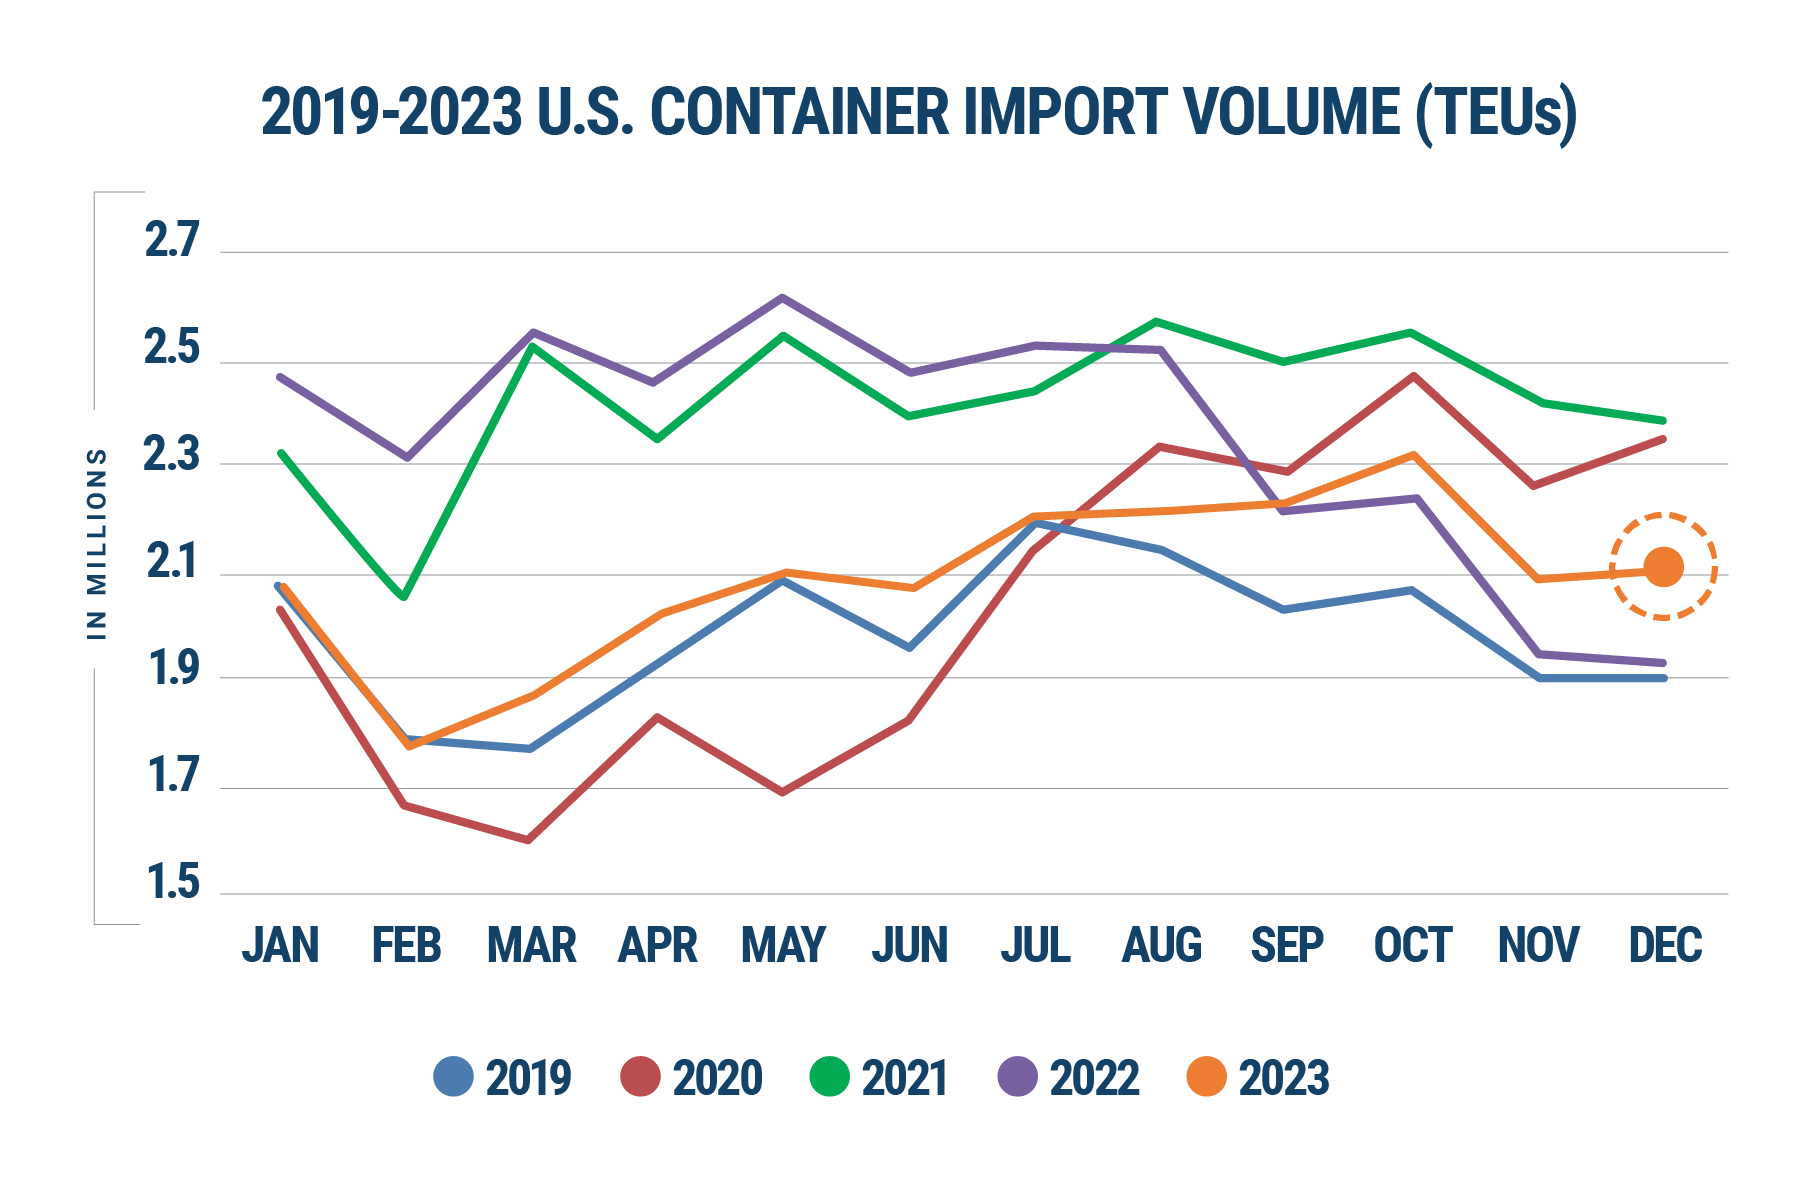 Chart showing U.S. container imports 2019-2023